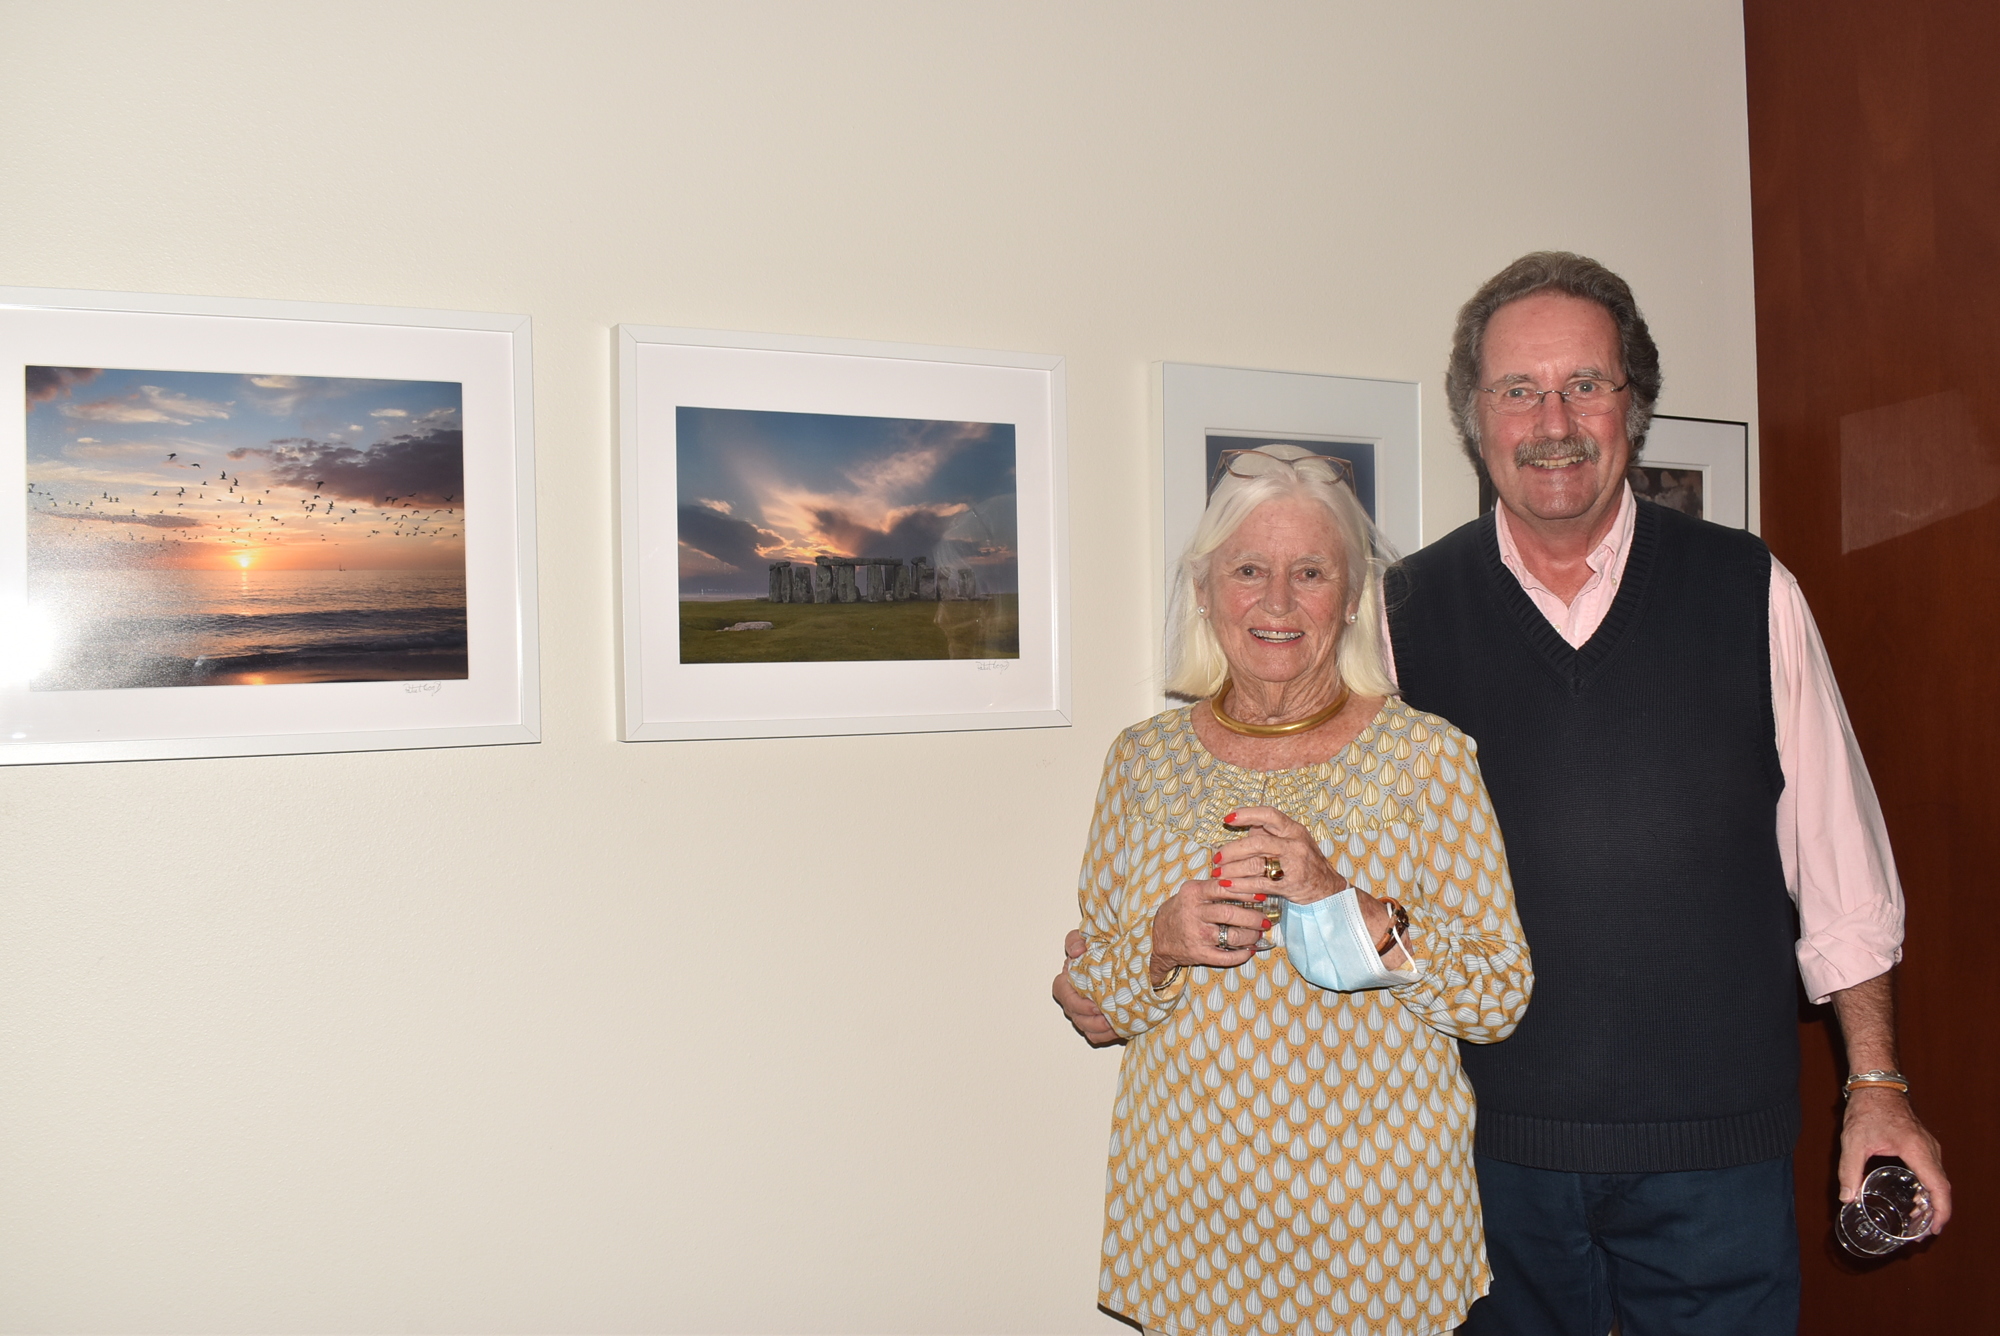 Patrick and Sandy Bogert made it to Longboat Key early enough to display Patrick's photography at the Town Hall art show in November.